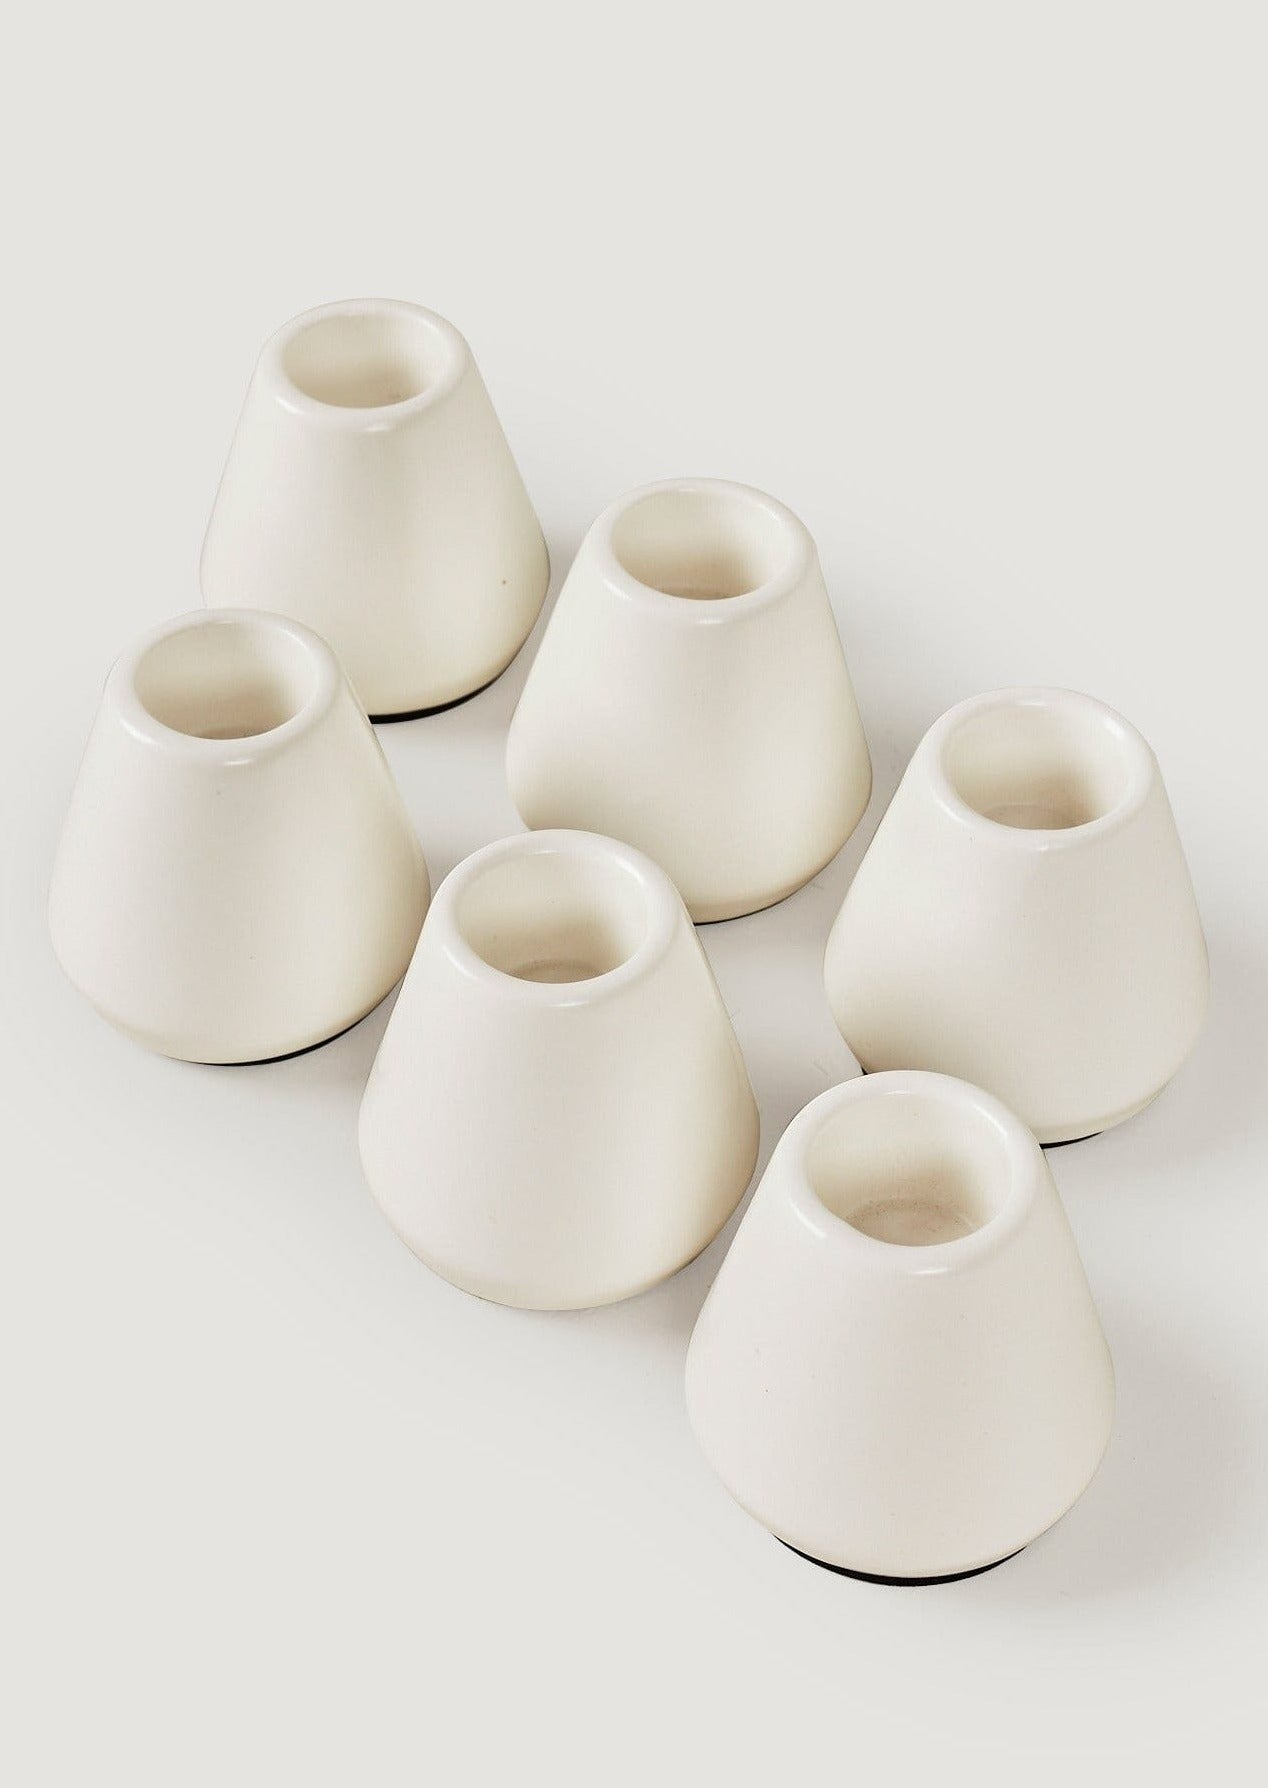 Exclusive Candle Holder Set in White at Afloral